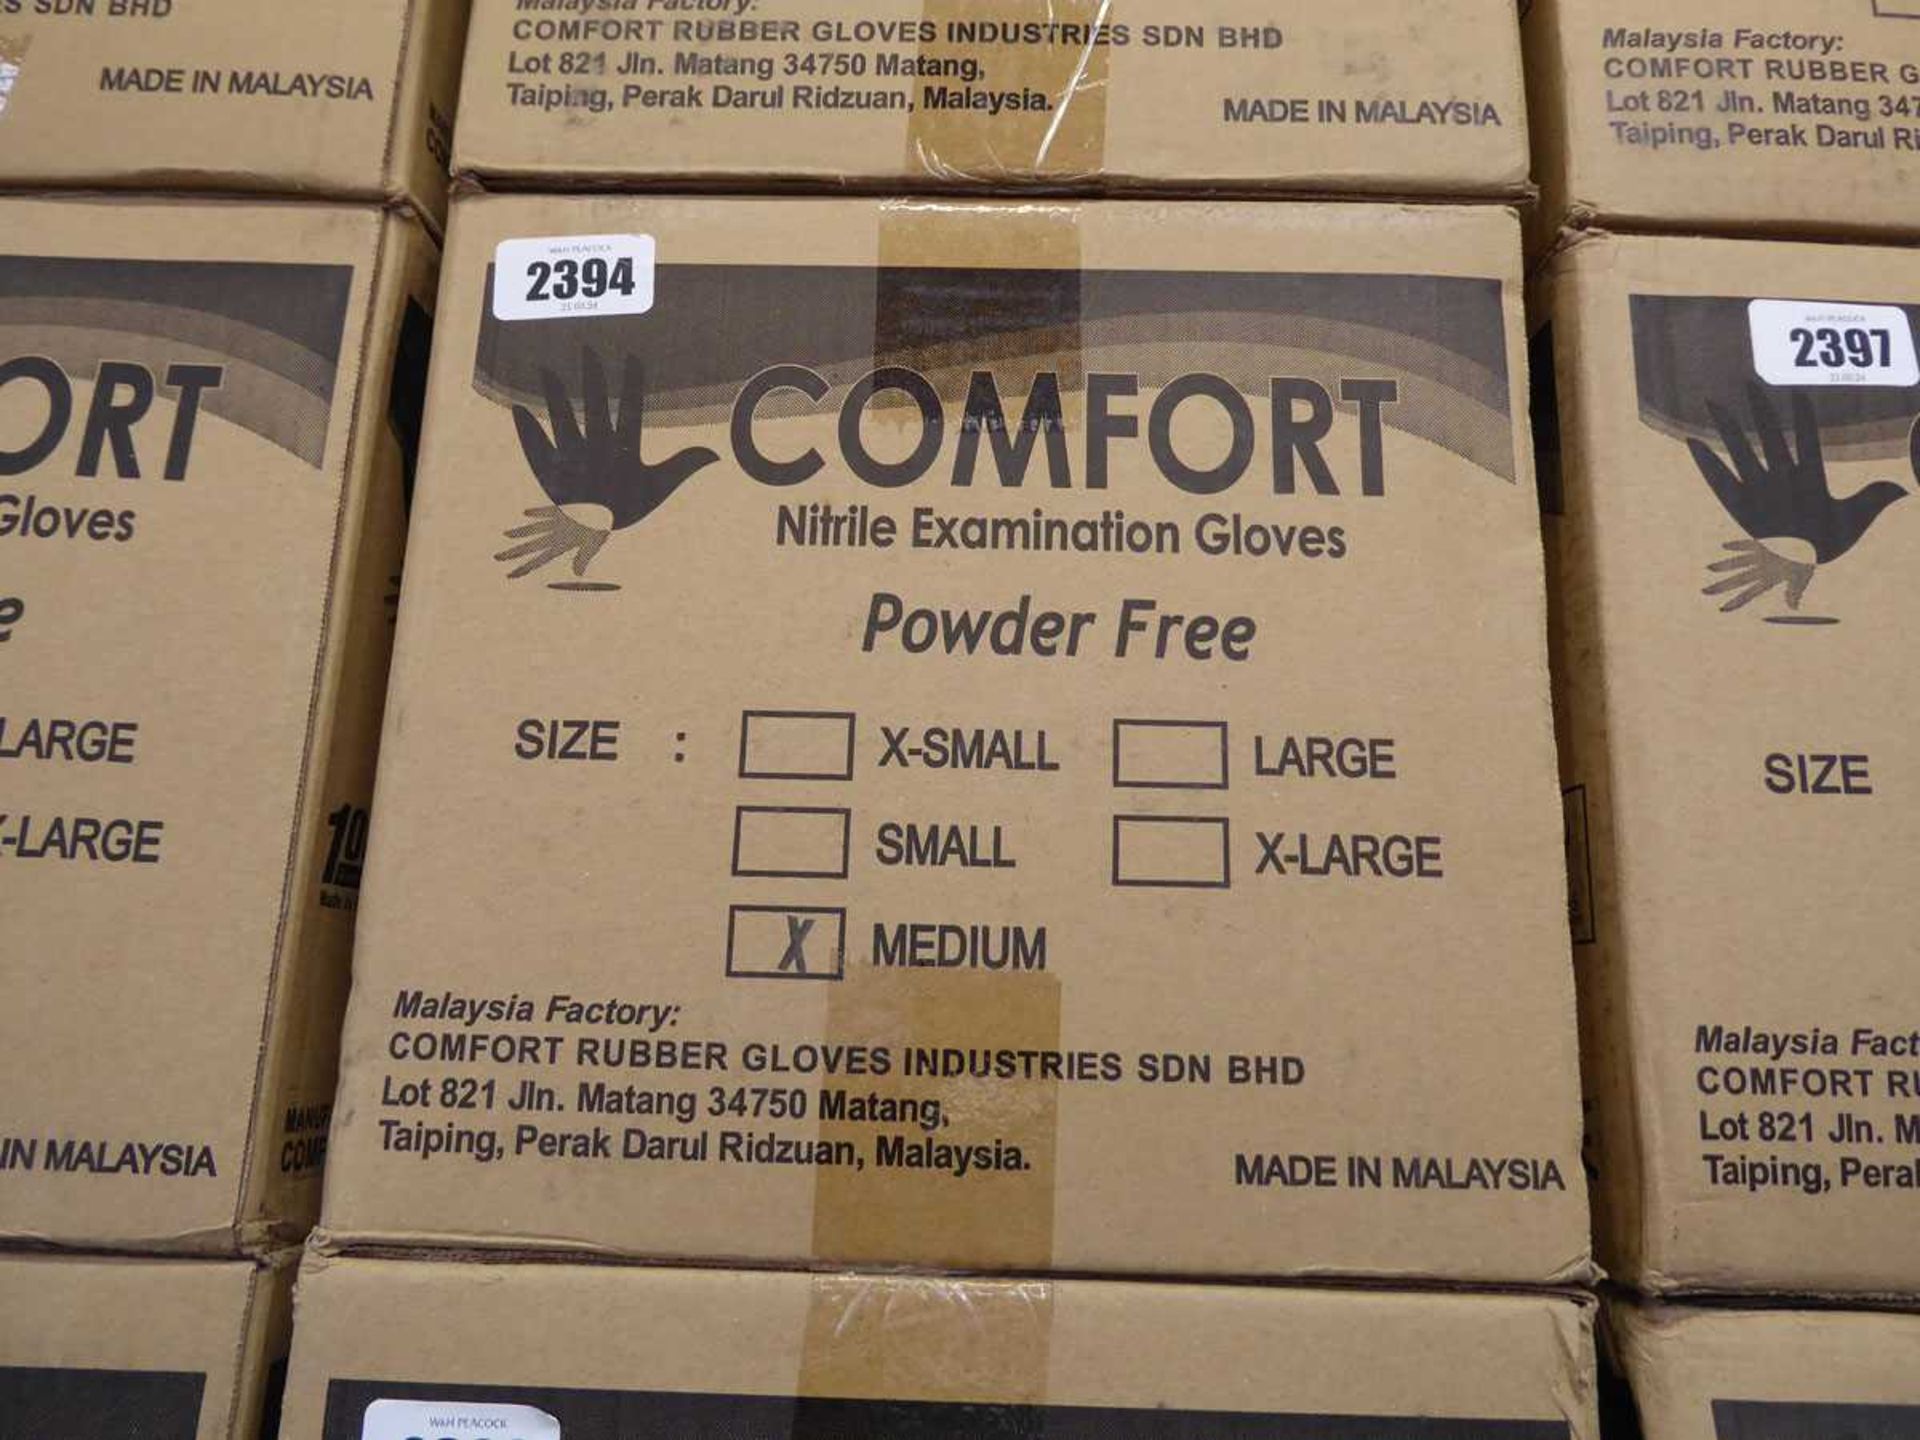 2 boxes containing 20 packs of 100 Comfort powder free nitrile examination gloves (size M) - Image 2 of 2